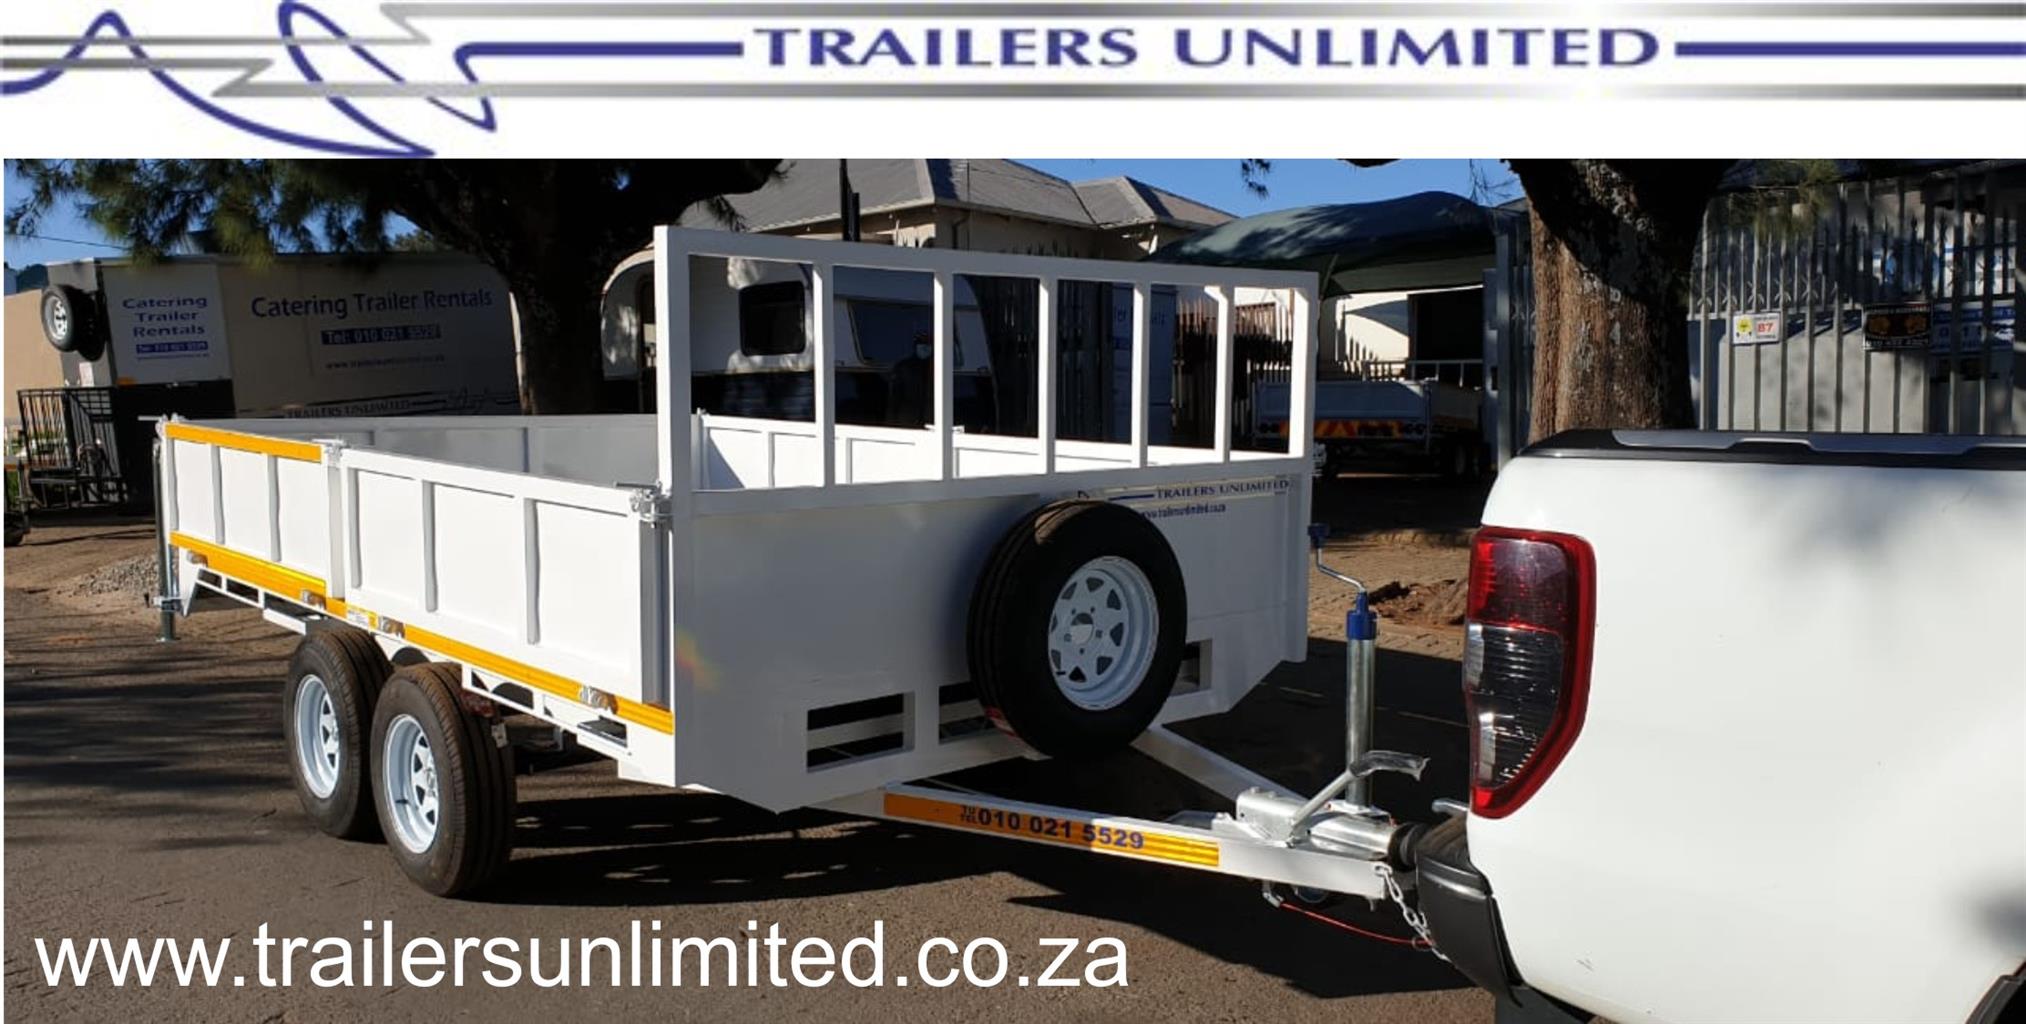 TRAILERS UNLIMITED FLATBED TRAILER